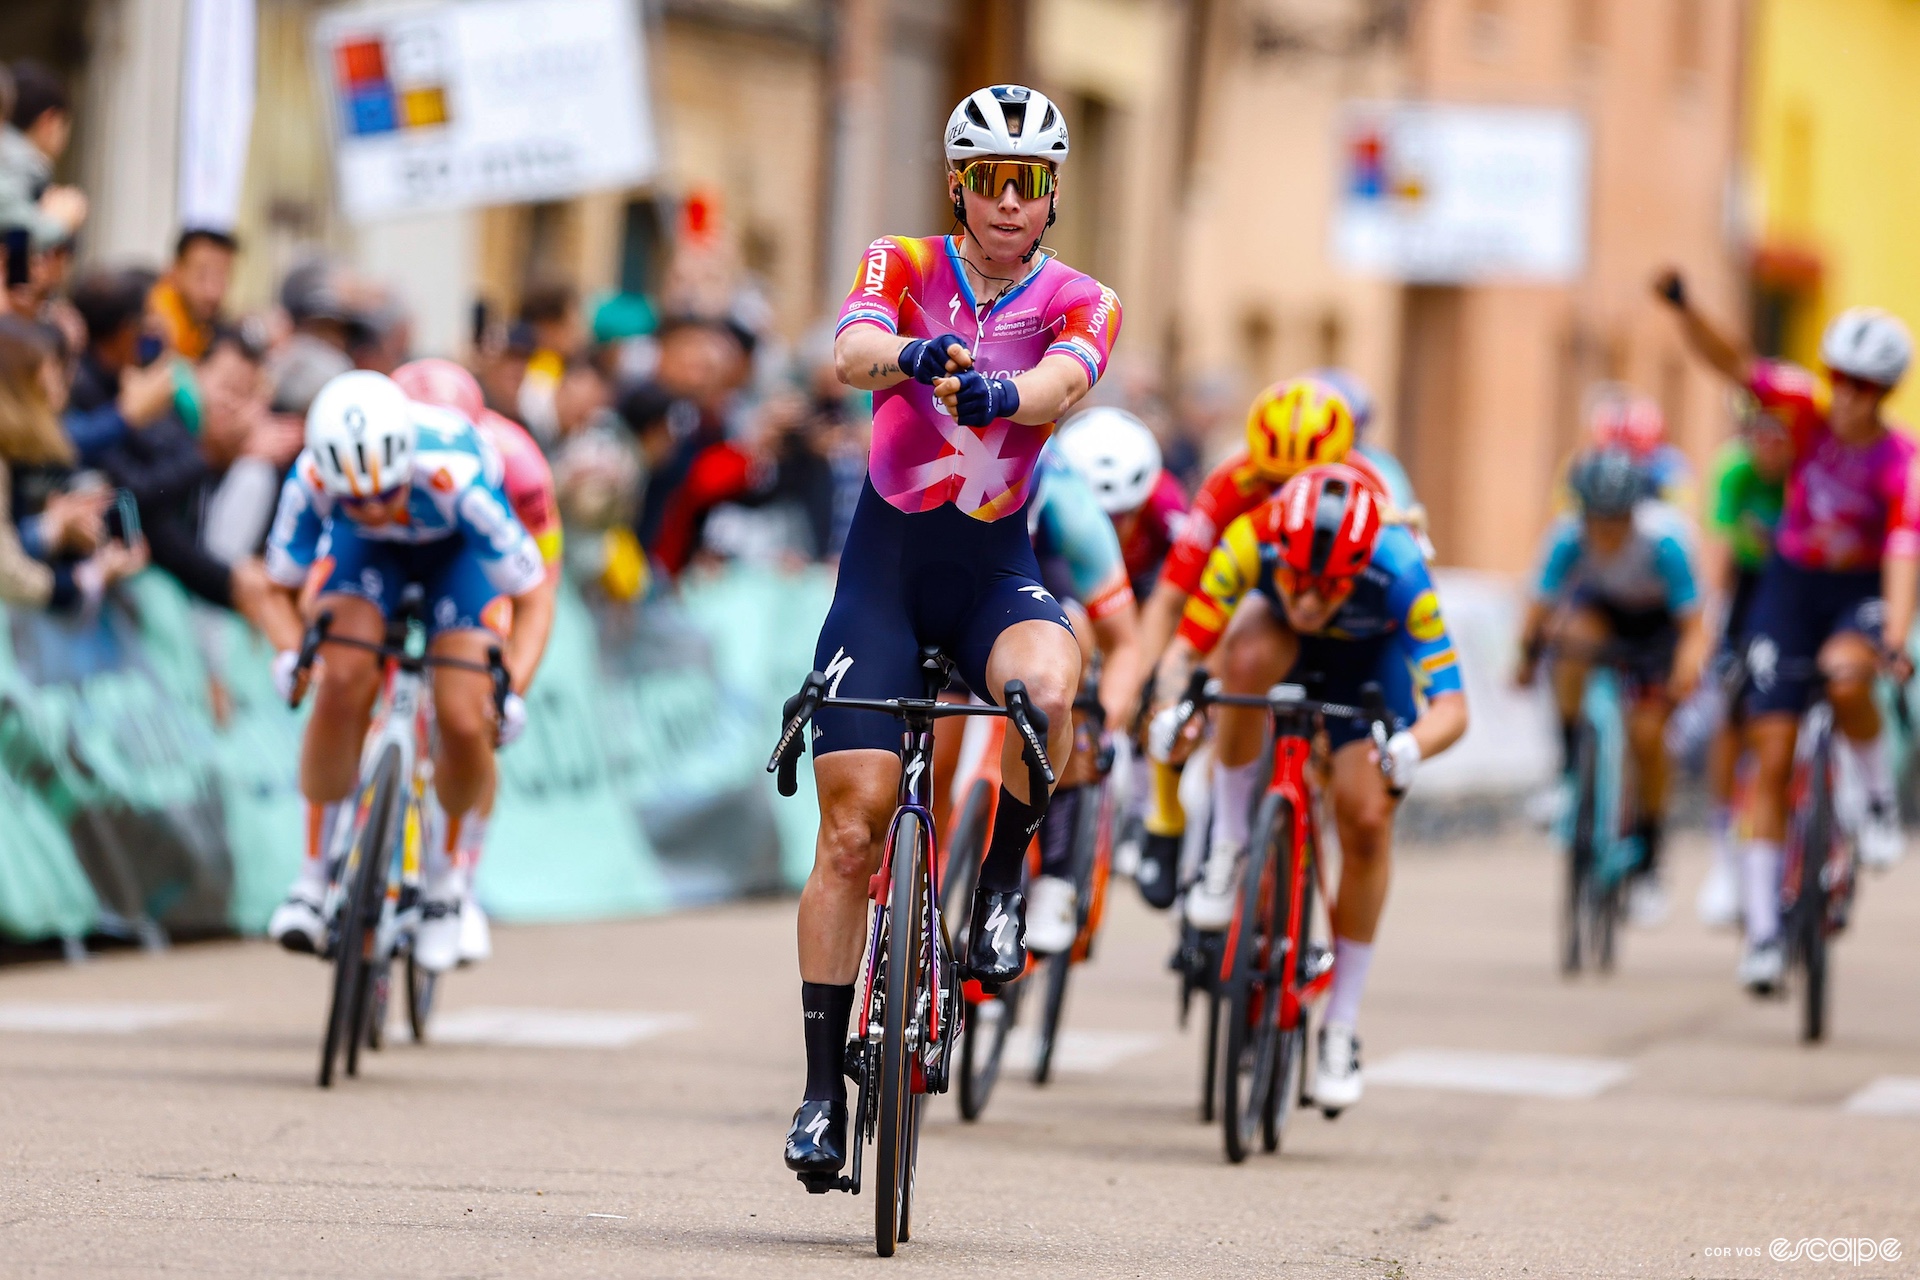 Lorena Wiebes shoots an arrow from an imaginary bow as she wins the third stage of Vuelta a Burgos.